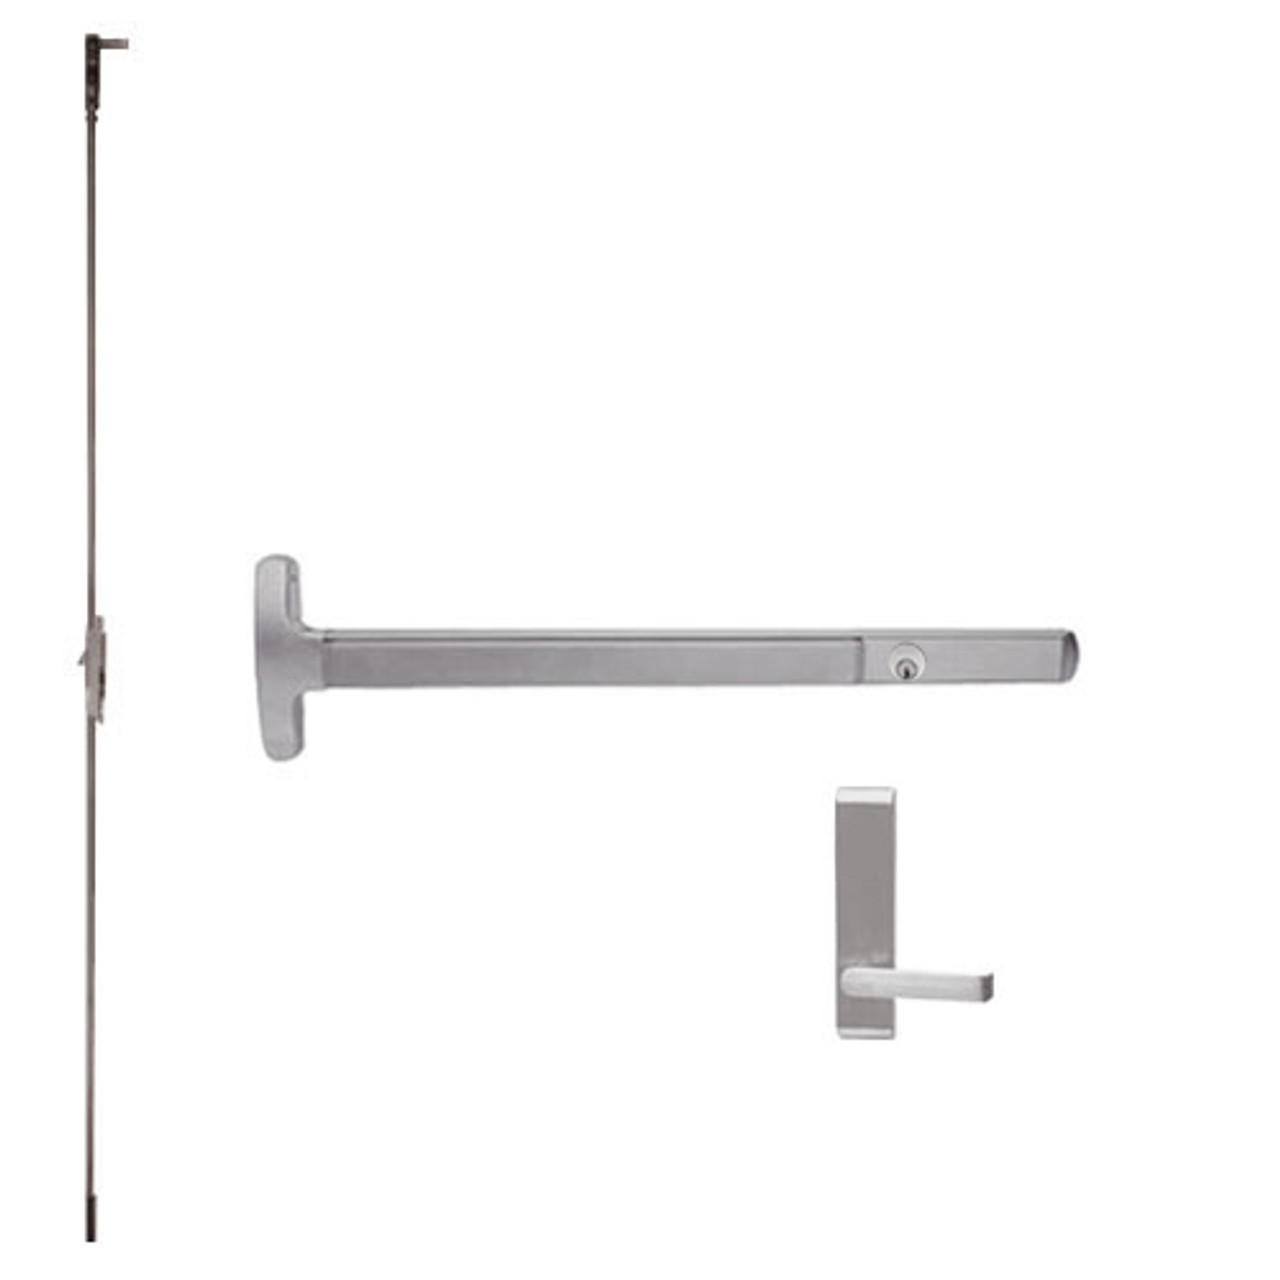 CD24-C-L-BE-DANE-US32D-3-LHR Falcon Exit Device in Satin Stainless Steel